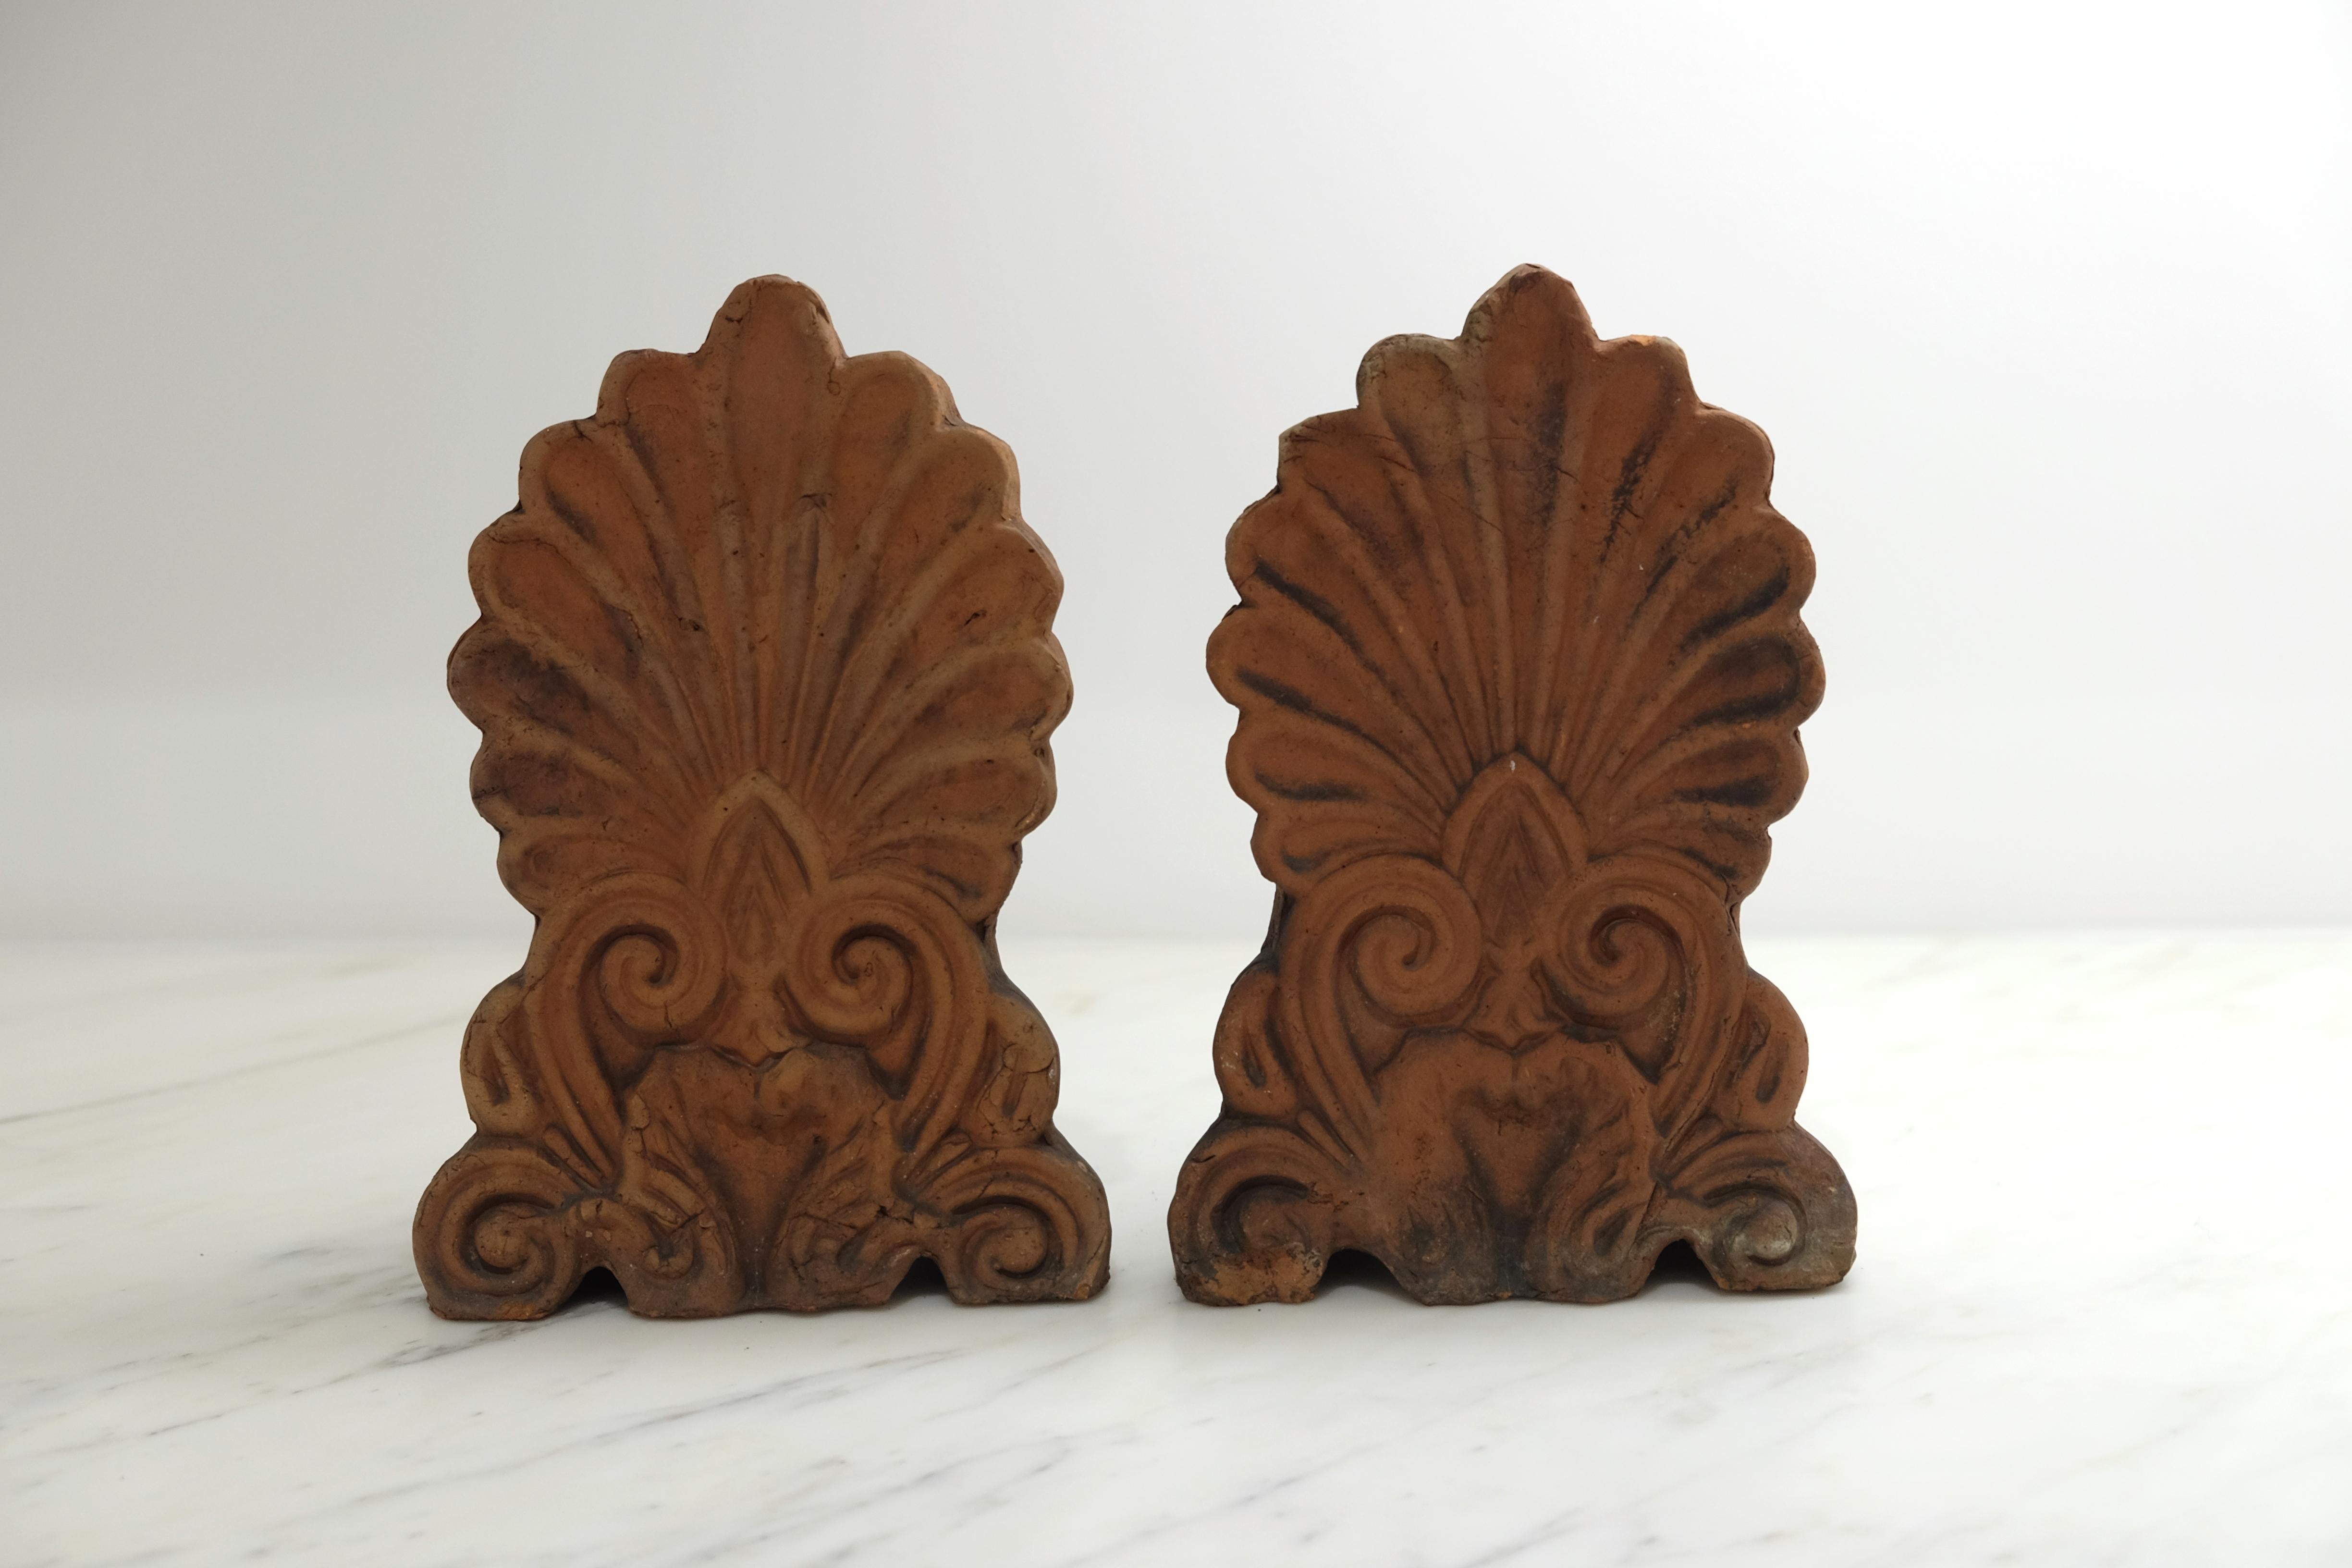 Pair of terracotta anthemion roof tiles, circa 1880. Anthemion was a design consisting of a number of radiating petals, developed by the ancient Greeks from the Egyptian and Asiatic form known as the lotus palmette.